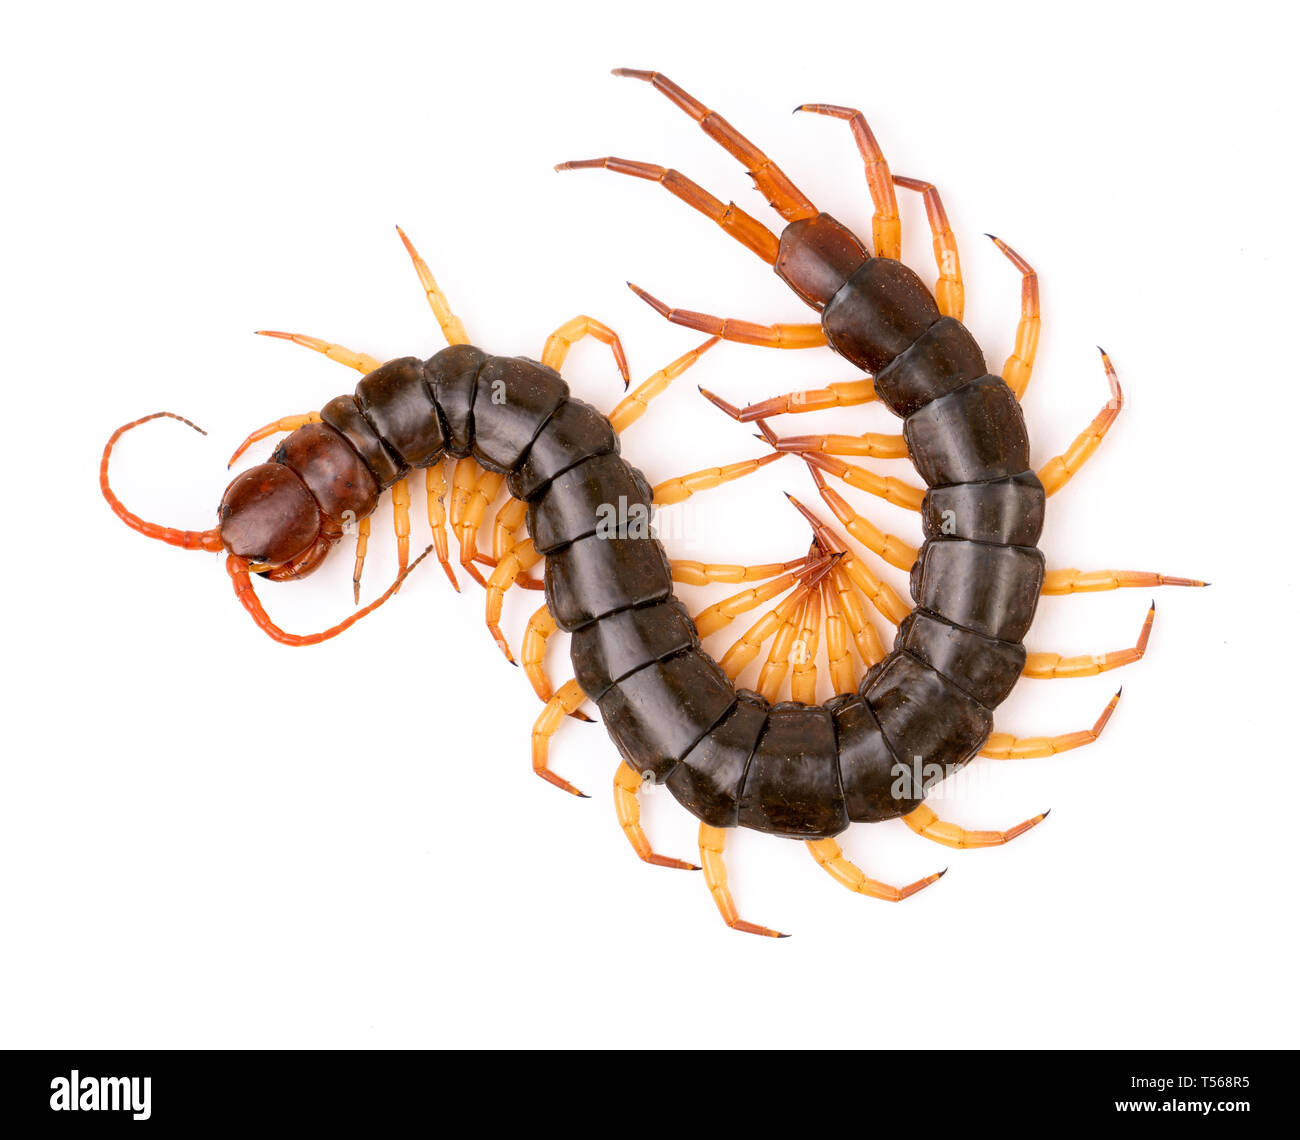 centipede or chilopoda isolated on white background Stock Photo